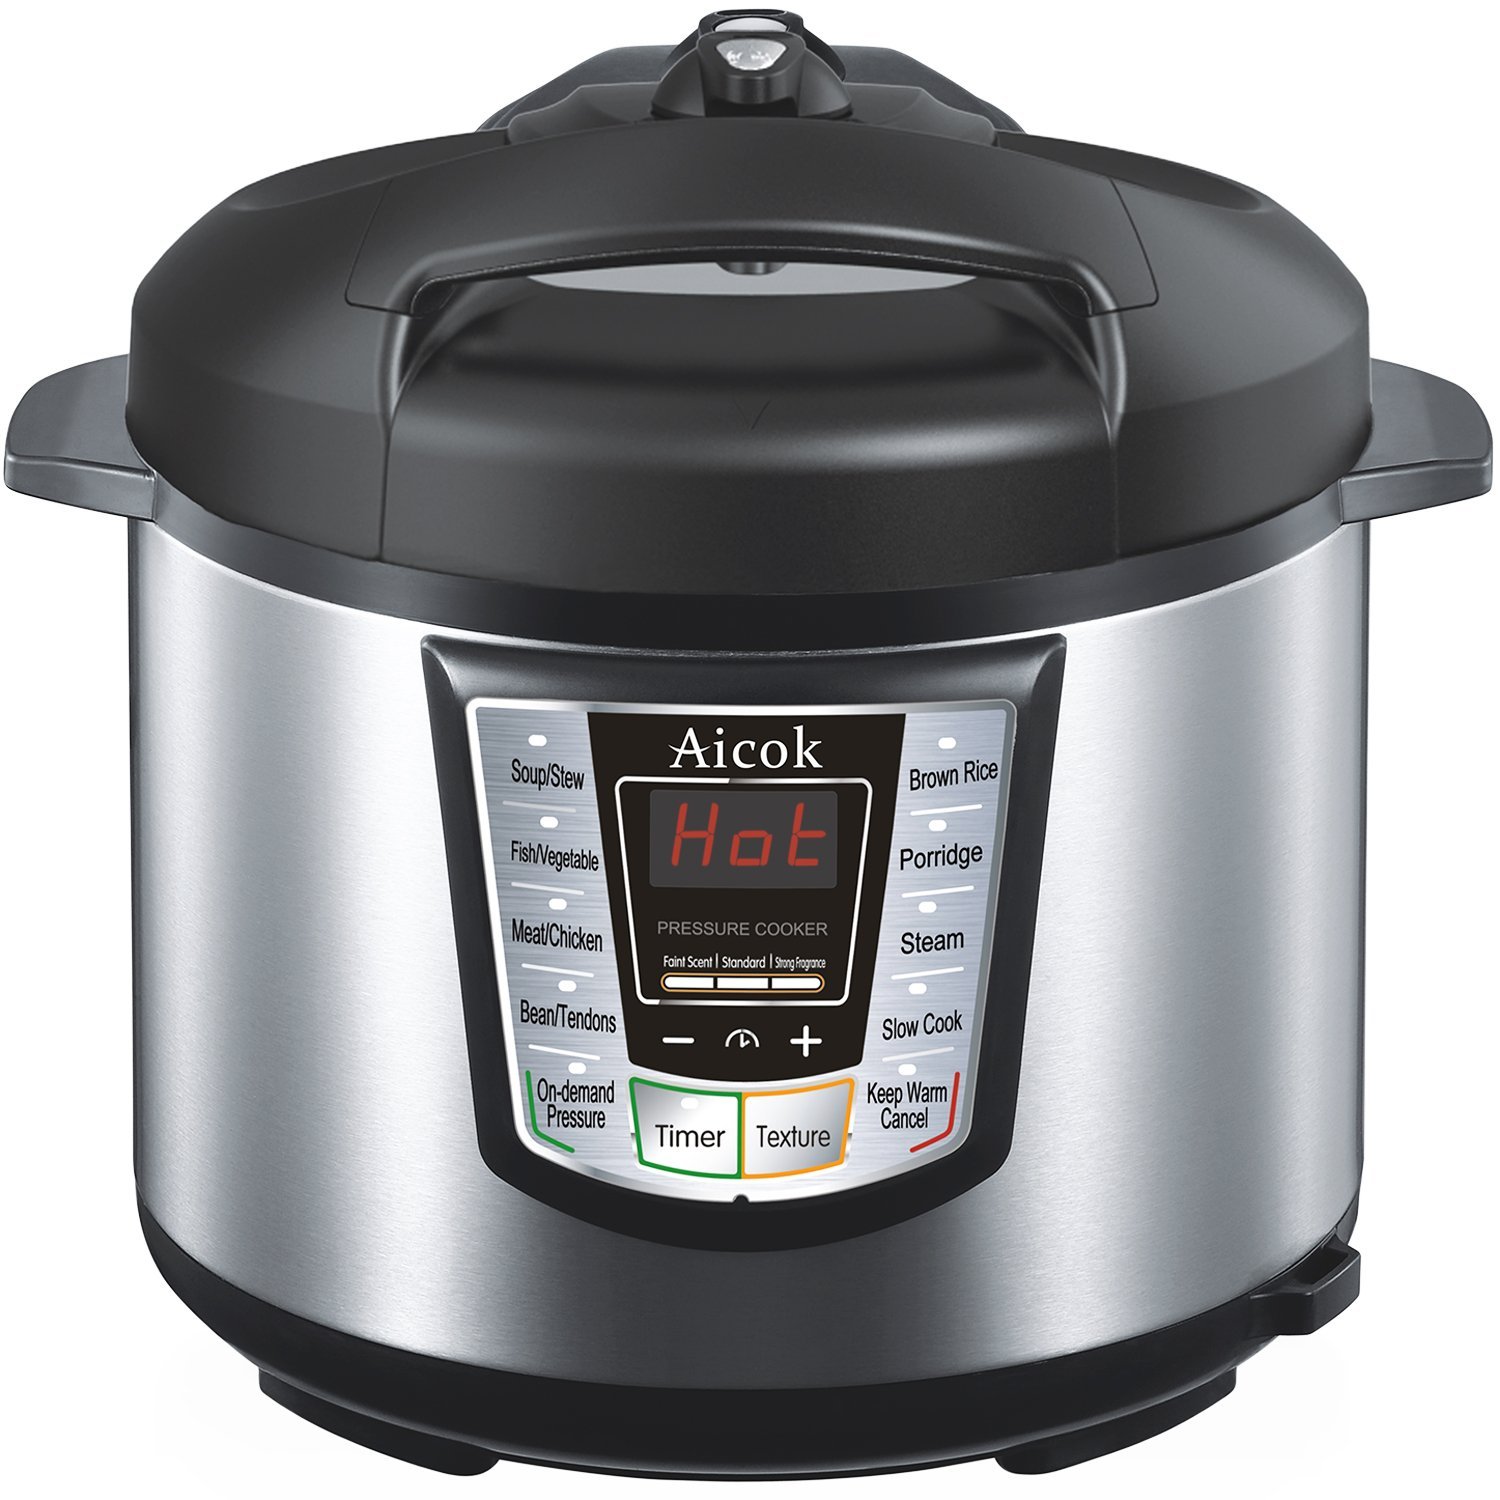 Aicok 7-in-1 Multi-Functional Programmable Electric Pressure Cooker, 6 Quart / 1000W